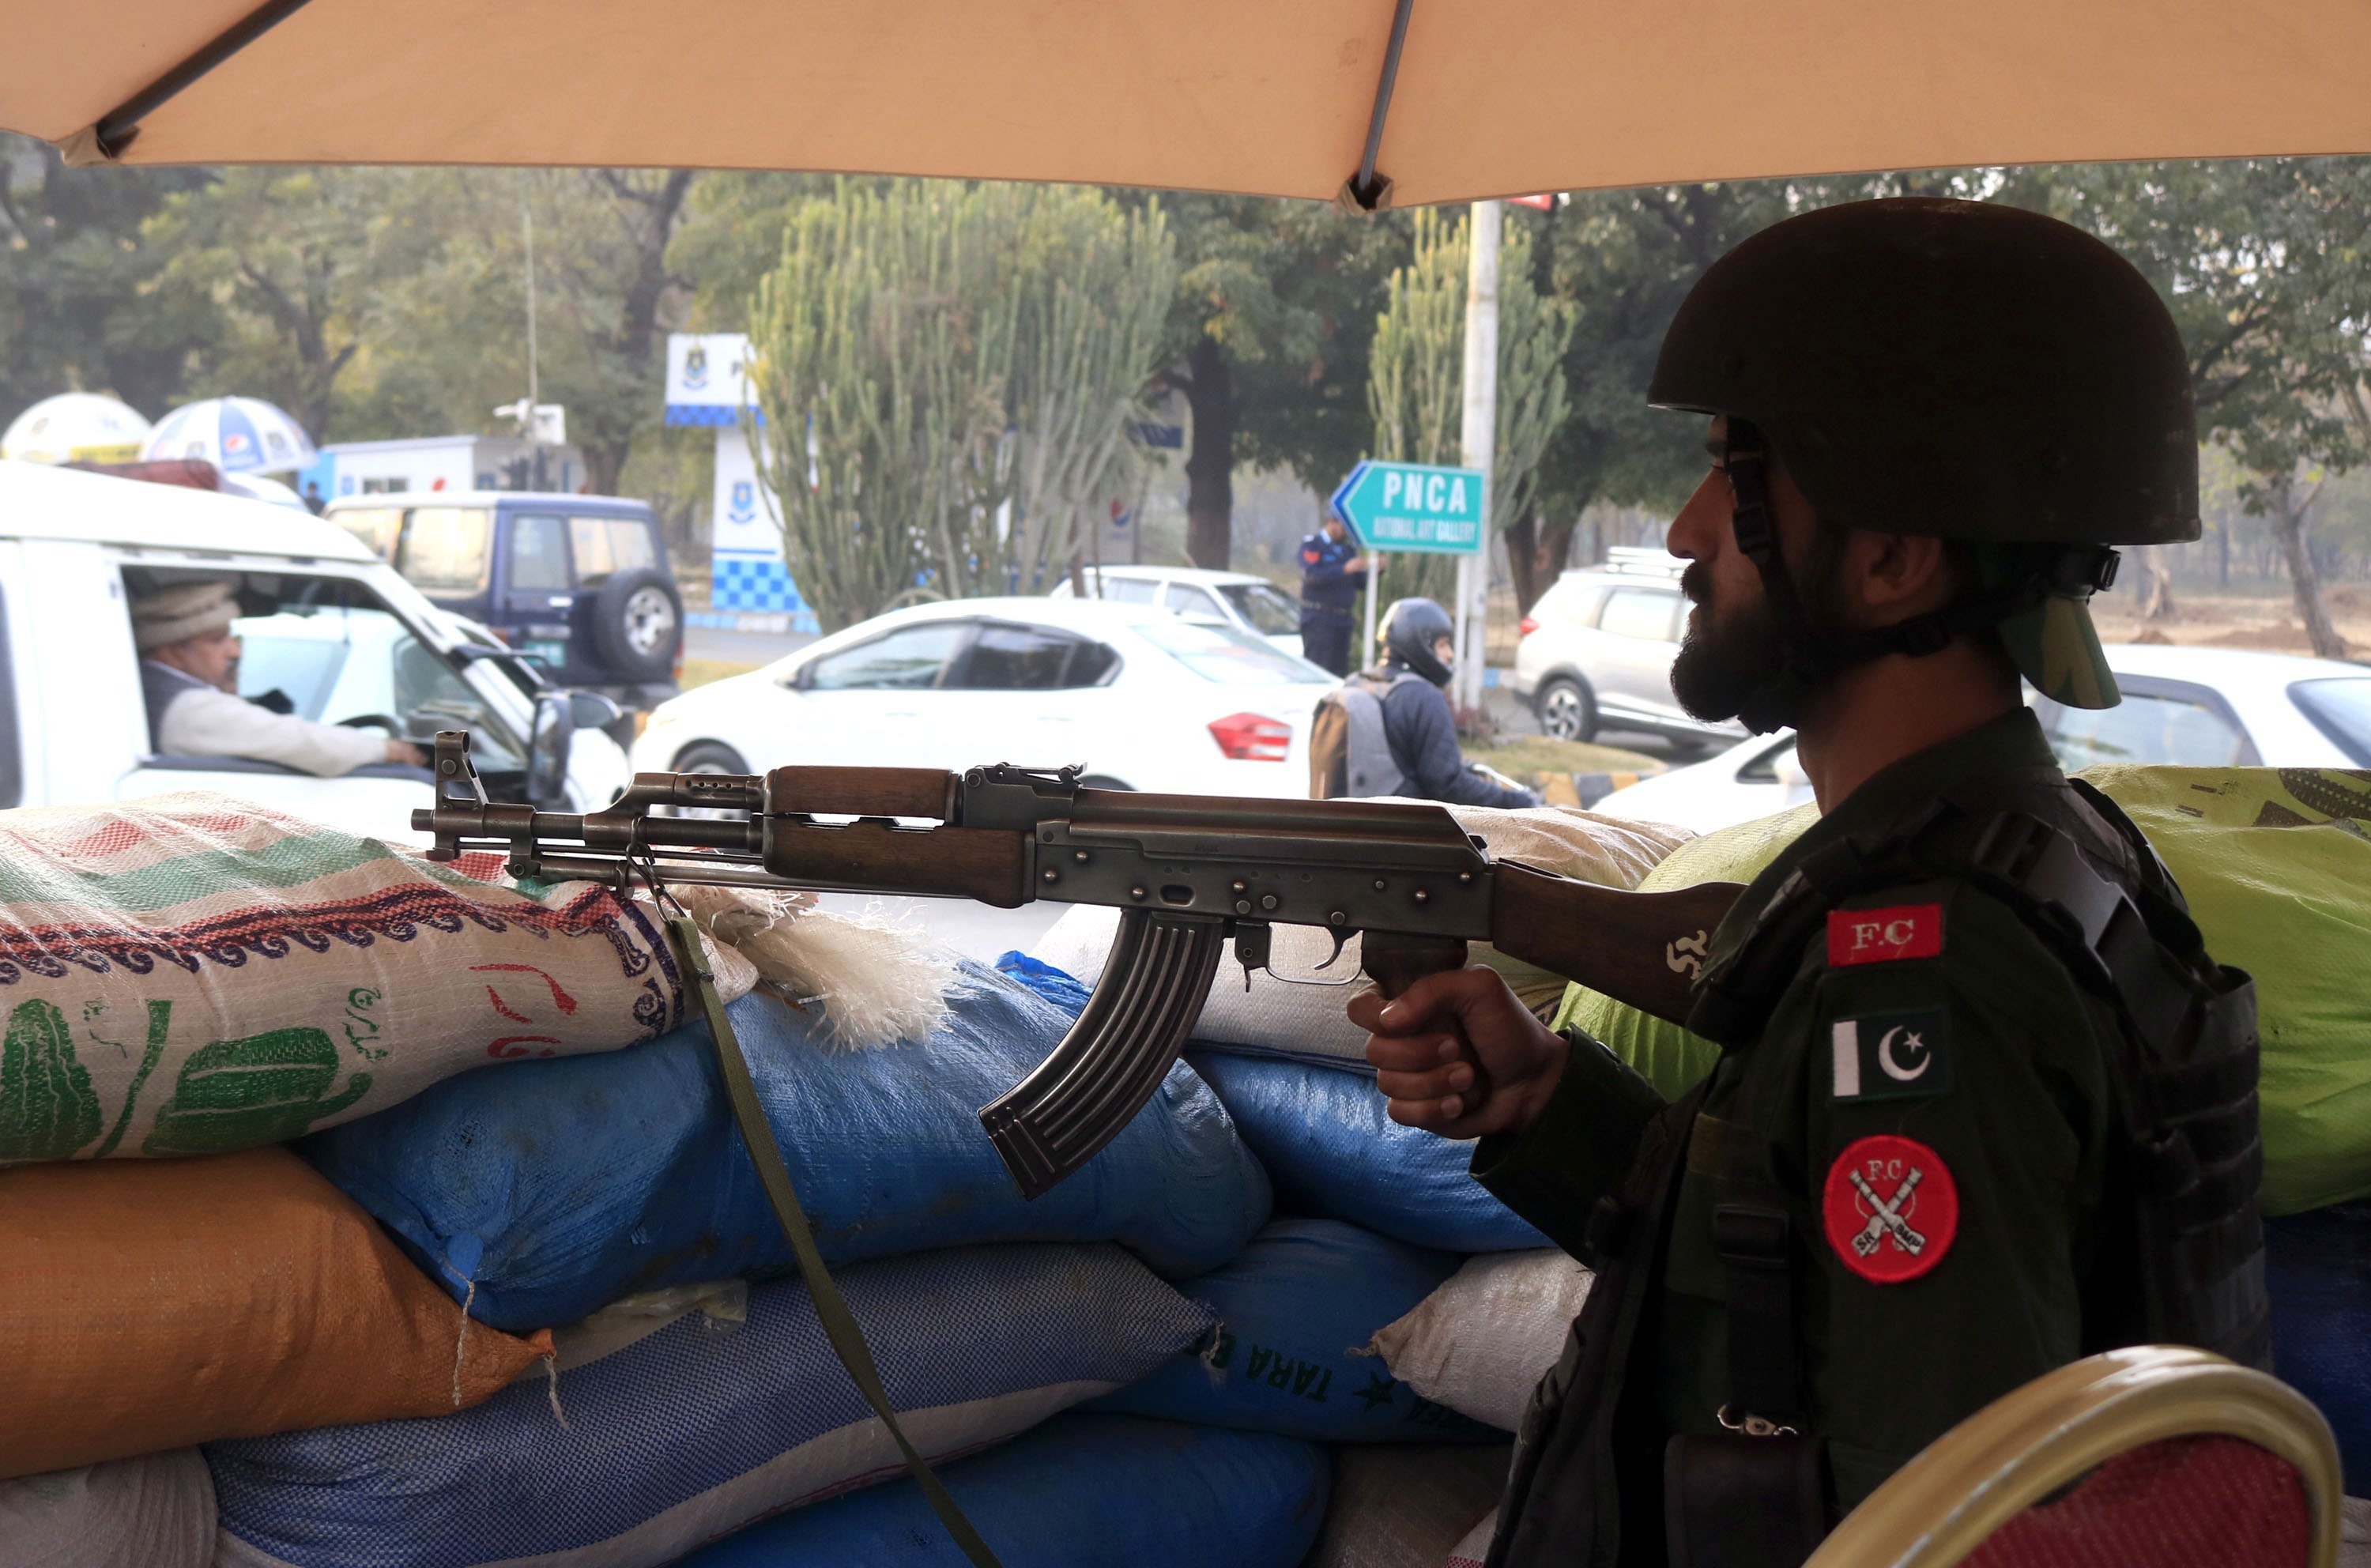 Pakistani security officials stand guard outside a hotel after a security alert on December 26, 2022. Photo: EPA-EFE